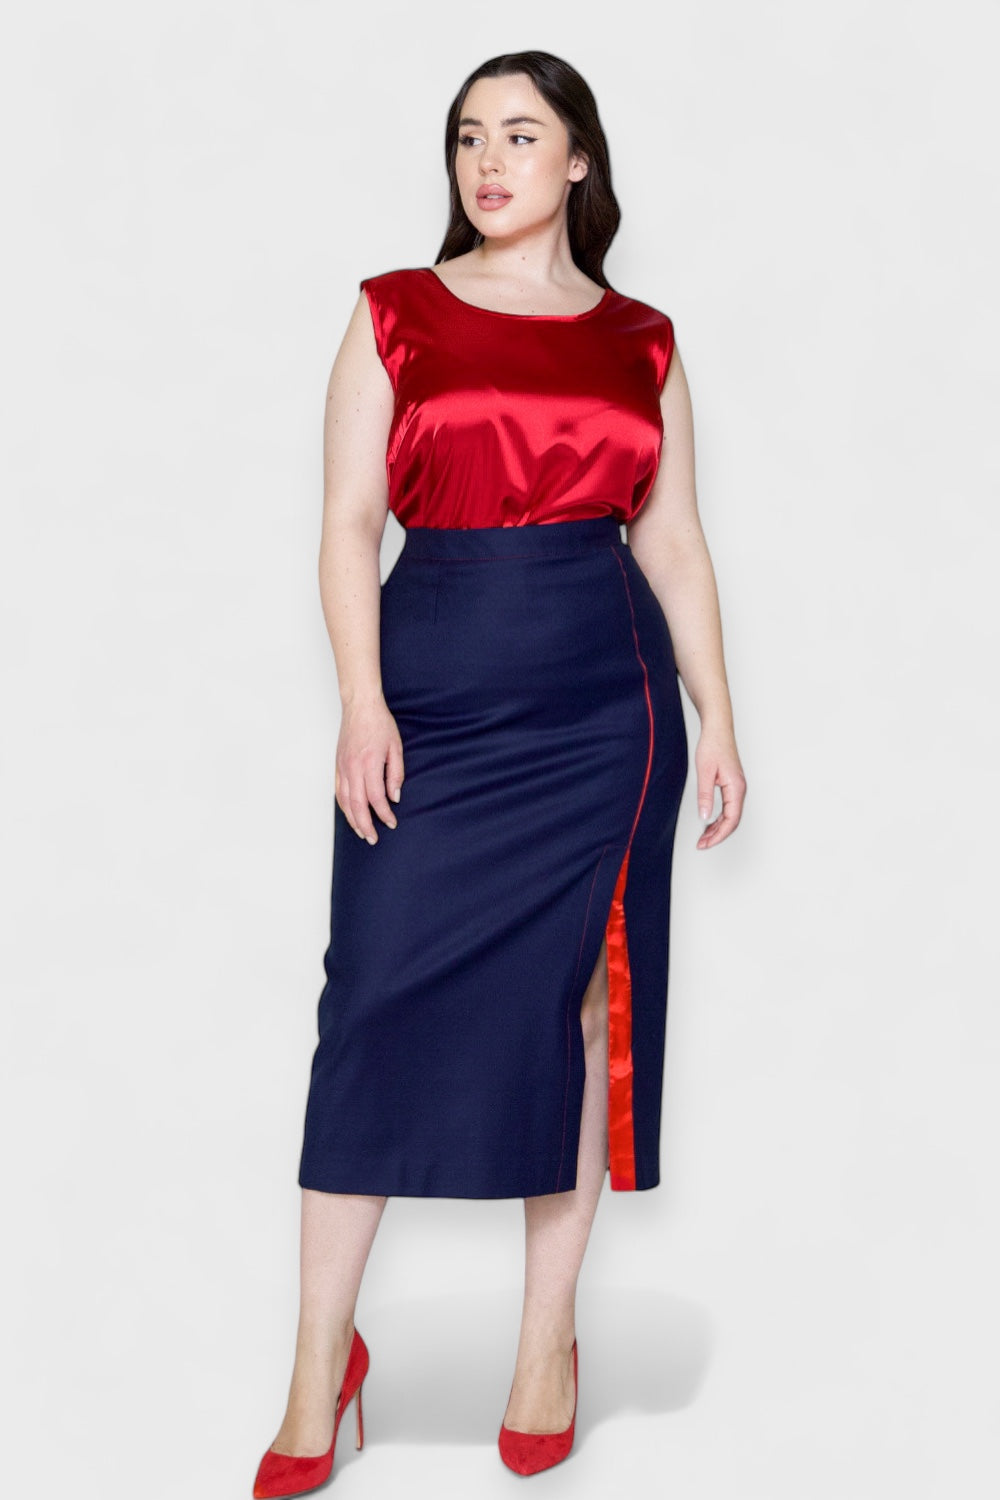 Plus Size Ravenna Red Satin Scoop Neck Tank Blouse Top by Sara Sabella Italian Women's Clothing Paired with Ravenna Suit Skirt